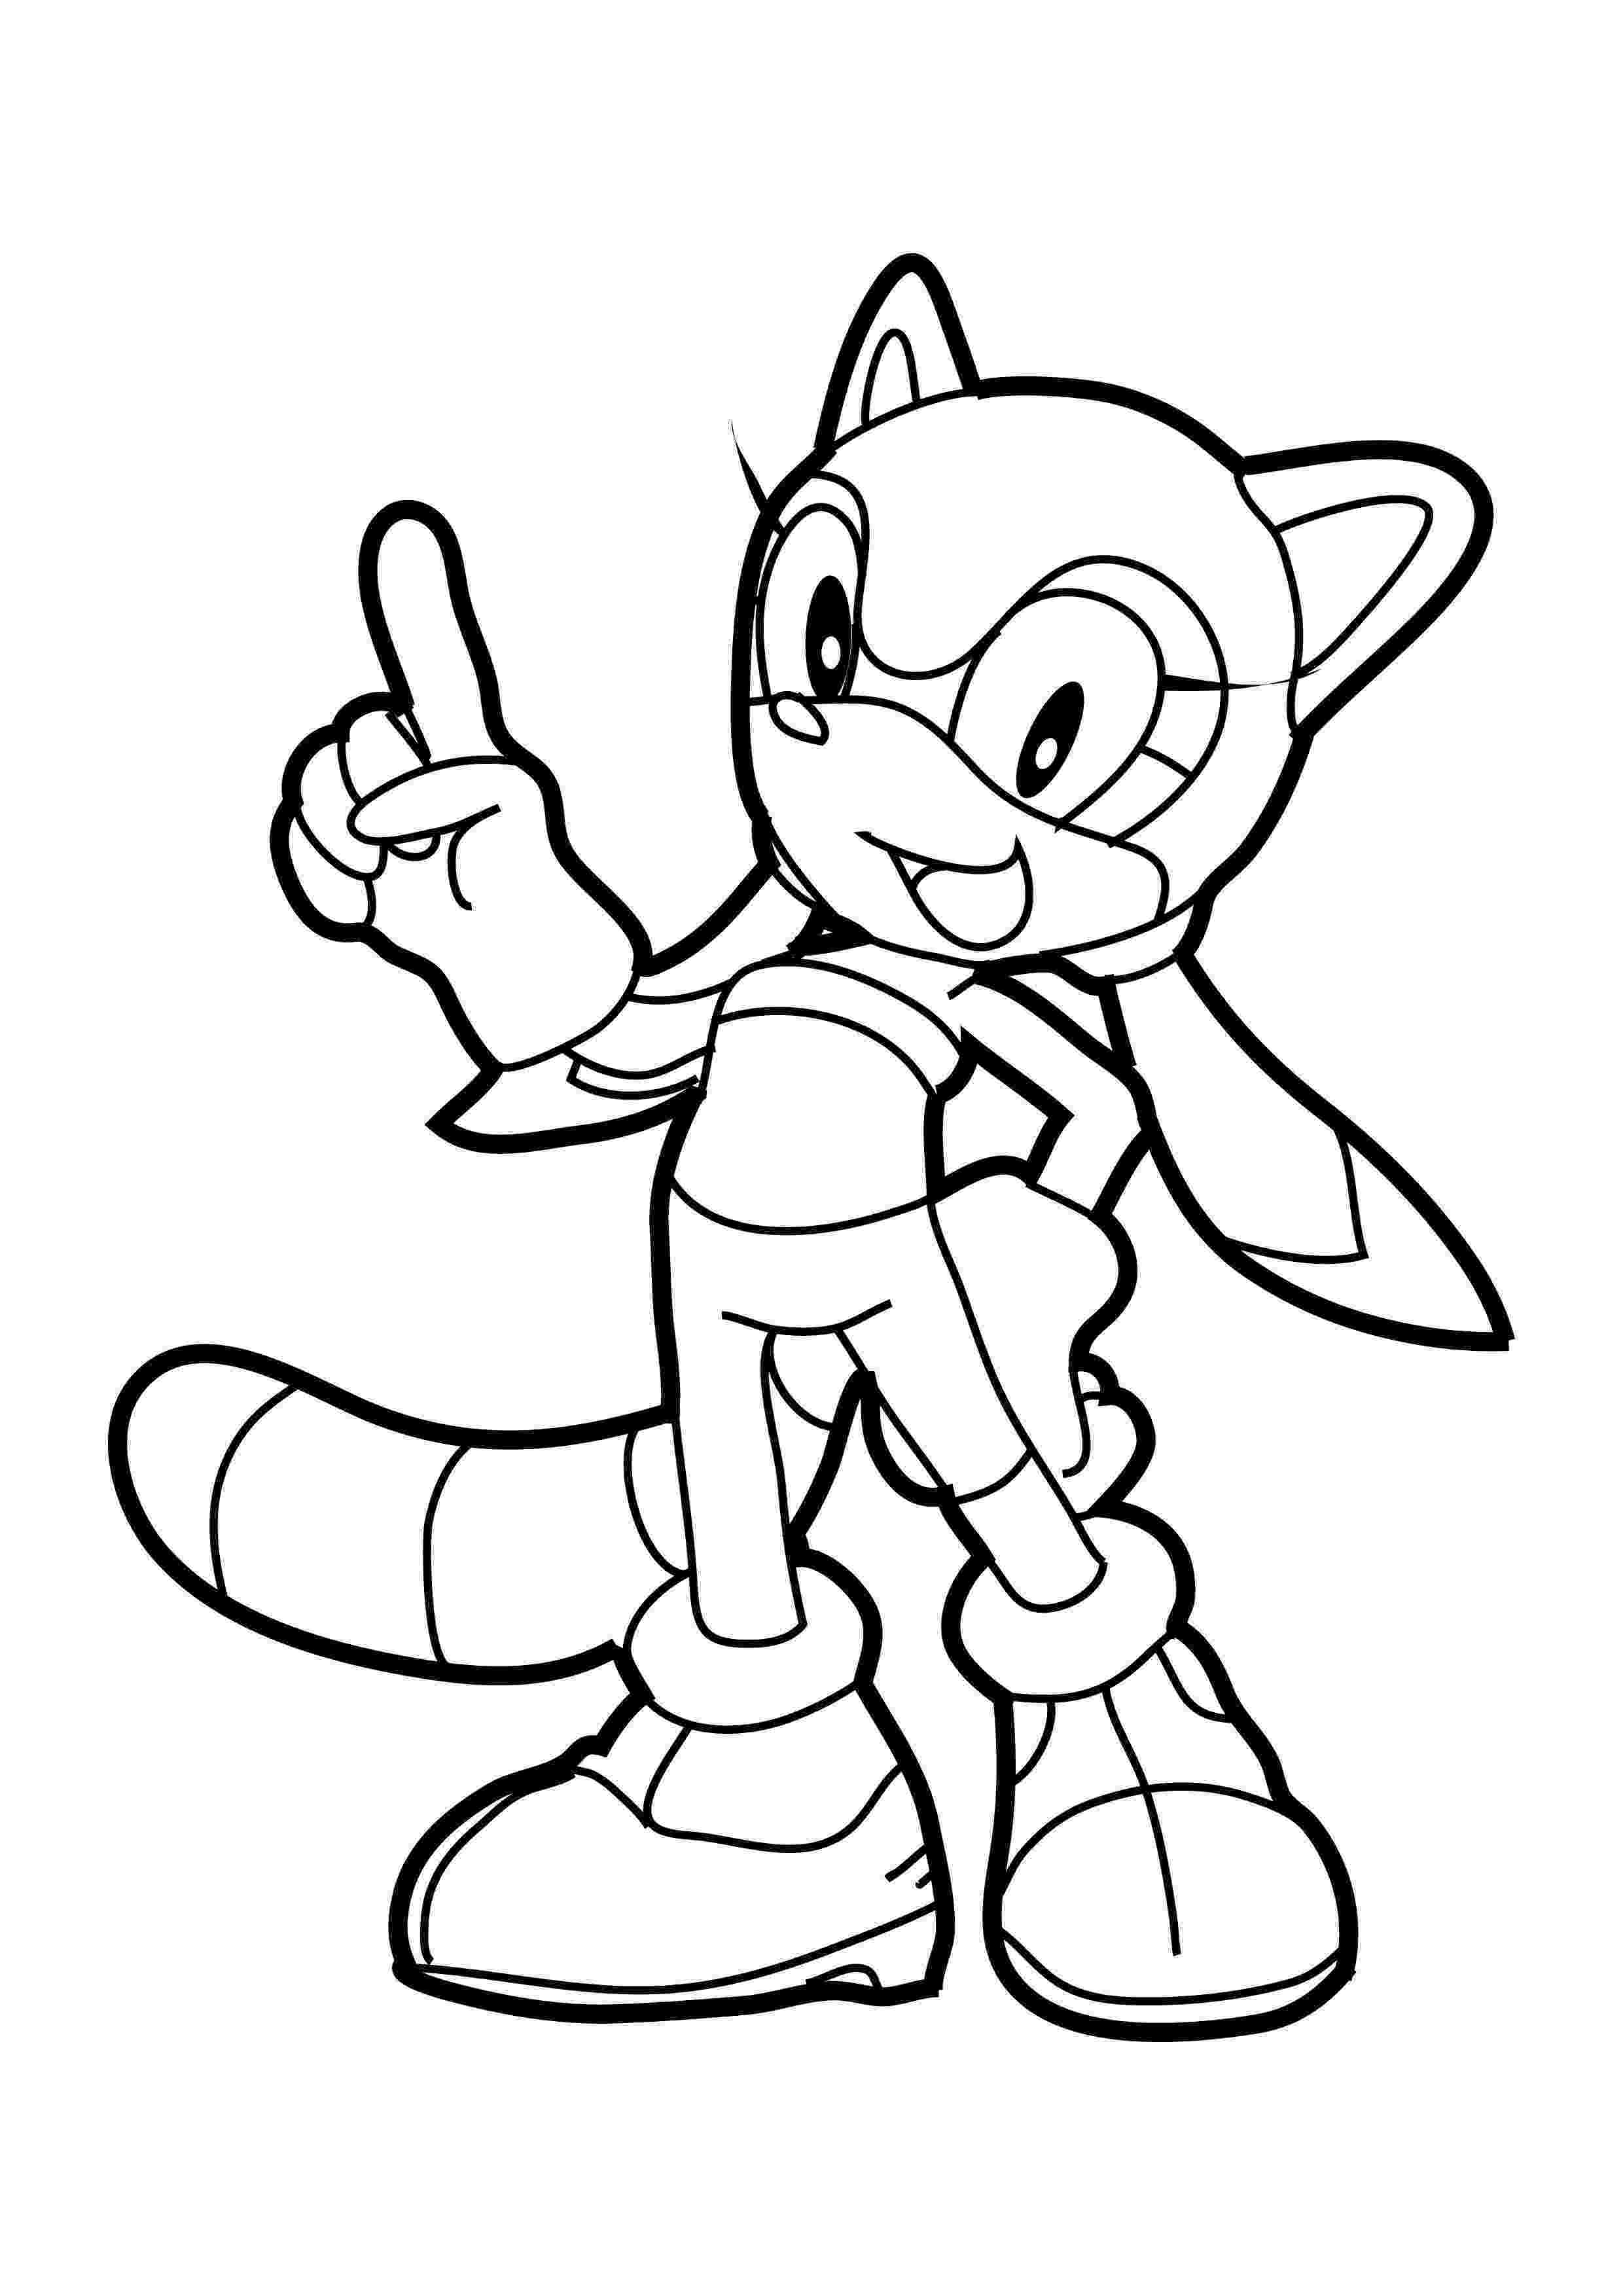 sonic the hedgehog coloring pages free printable sonic the hedgehog coloring pages for kids coloring the pages hedgehog sonic 